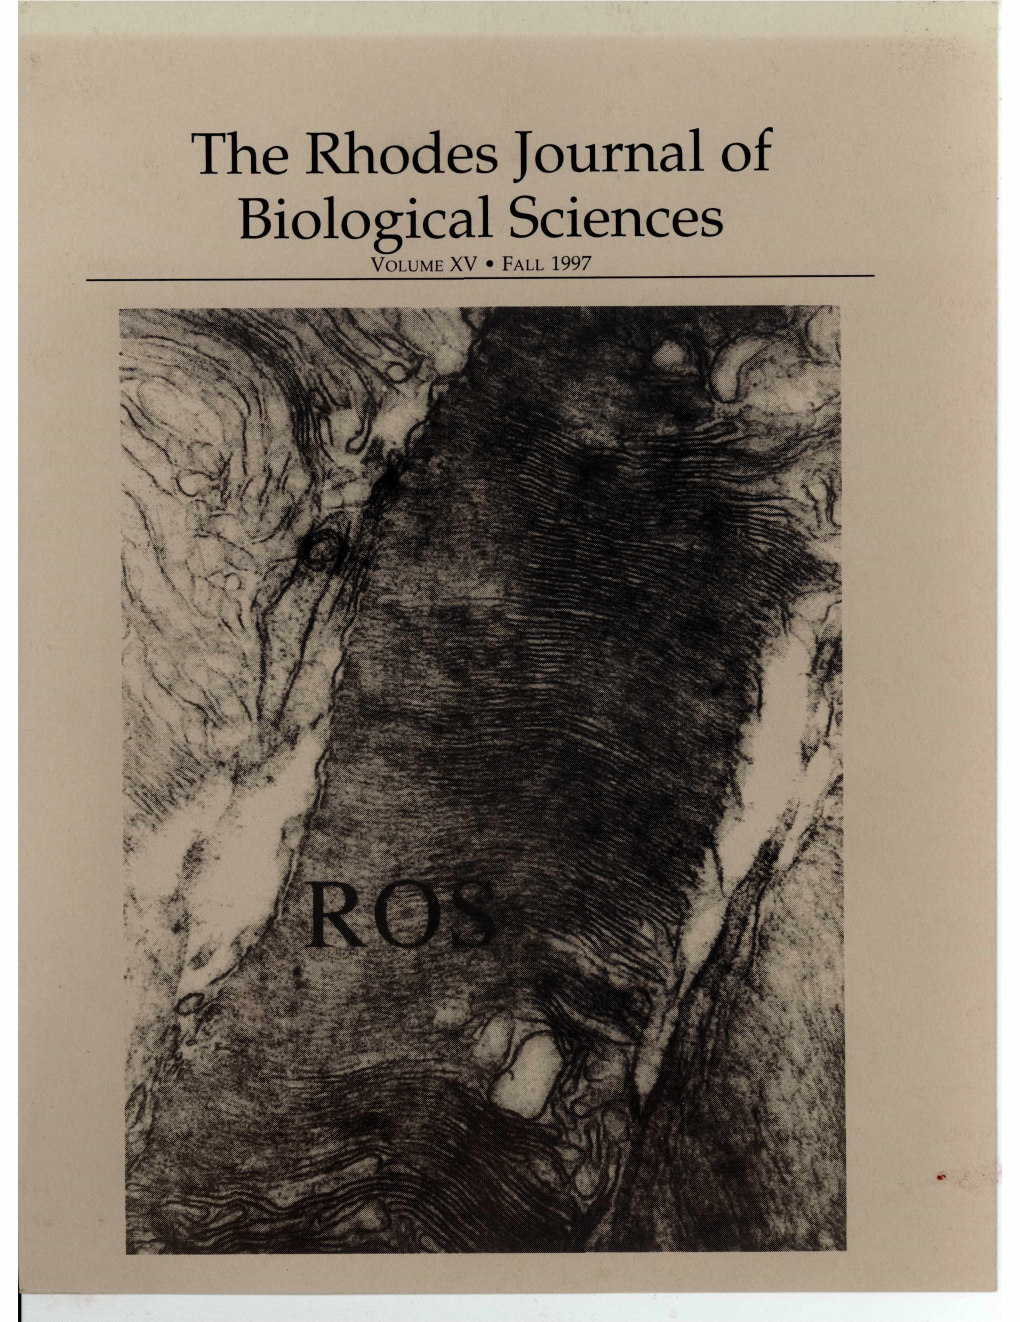 The Rhodes Journal of Biological Sciences VOLUME XV • FALL 1997 the Rhodes Journal of Biological Sciences VOLUME XV • FALL 1997